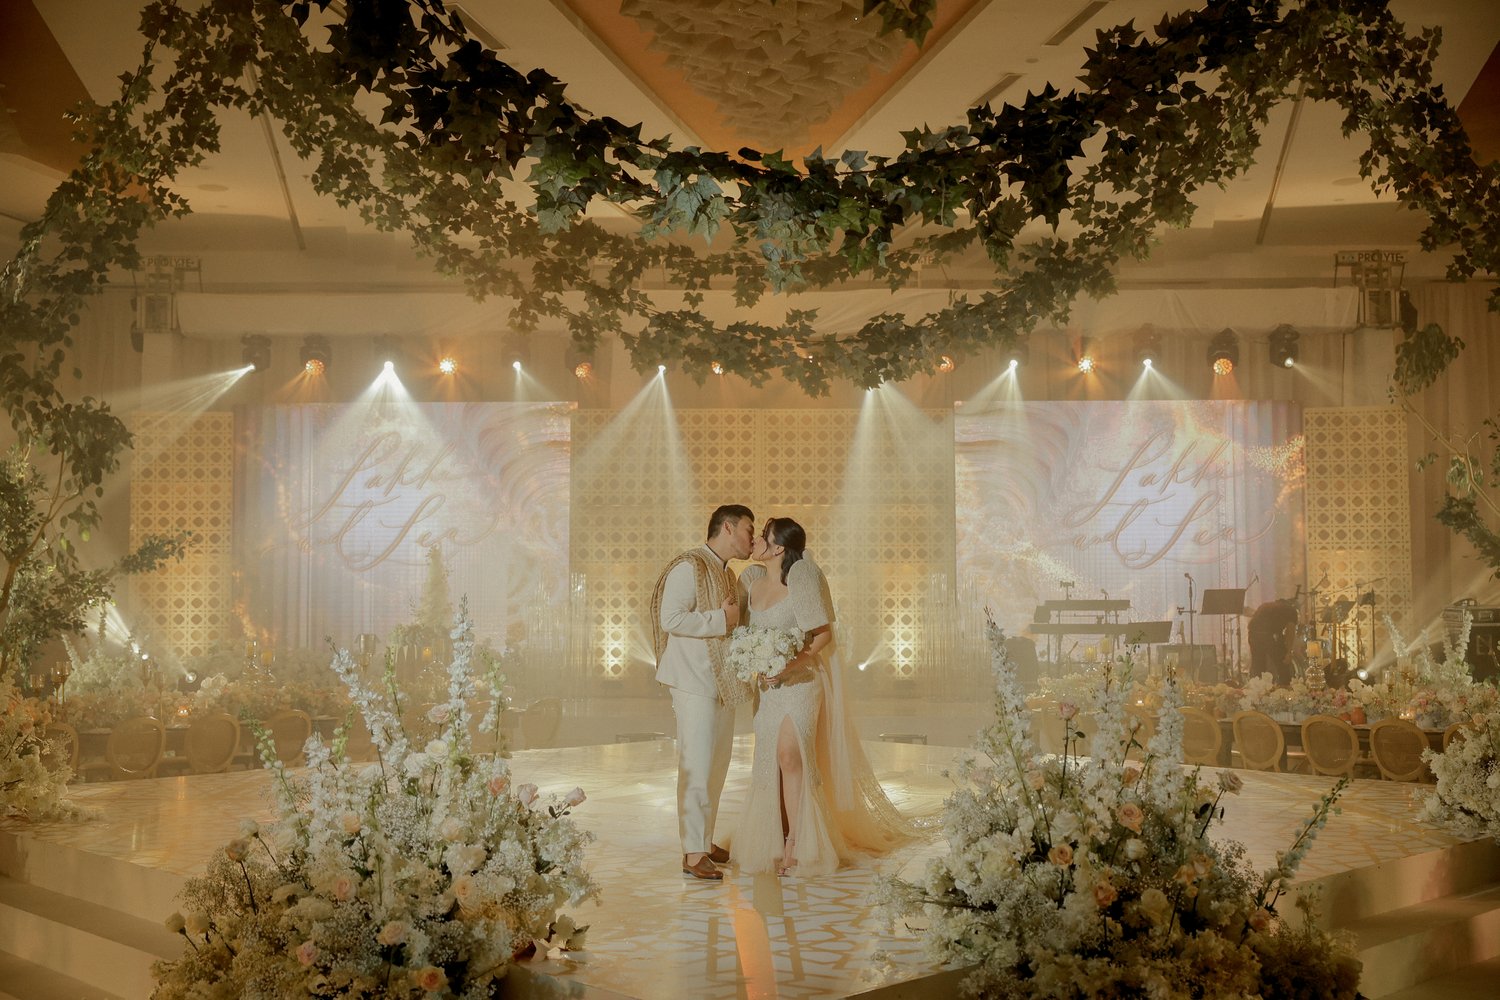 Lea Villena and Lakhi Siap celebrate their forever love with a multicultural ceremony